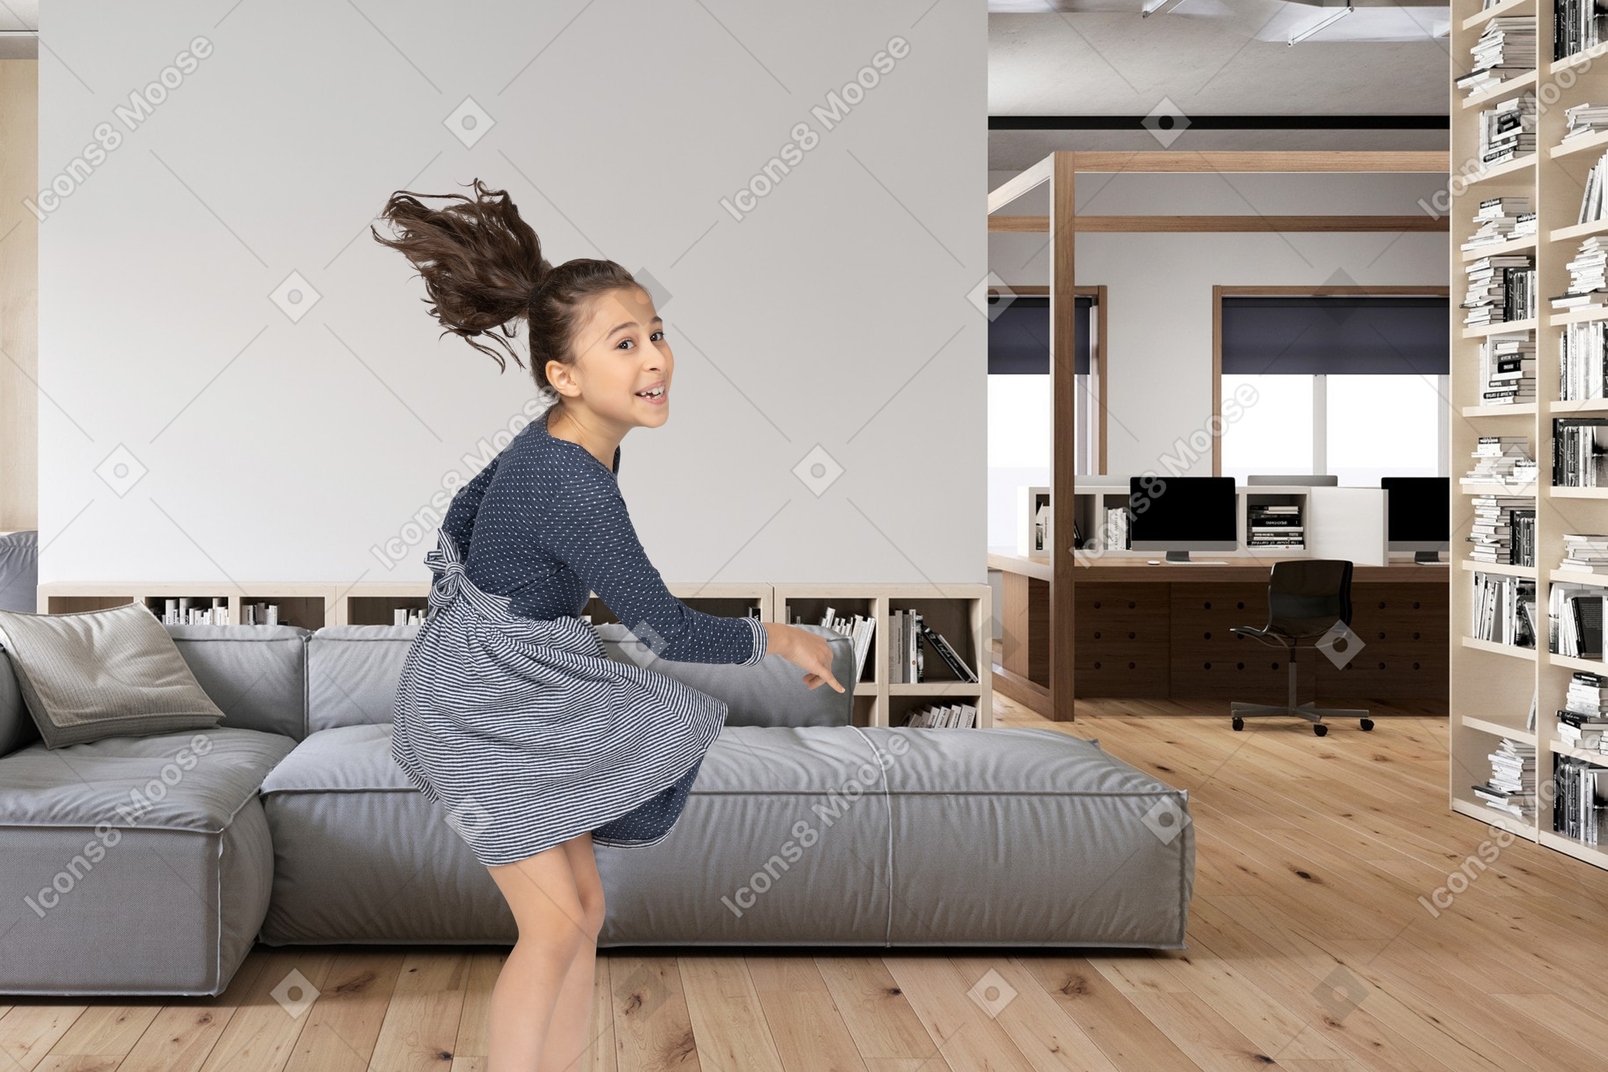 A young boy jumping on a bed